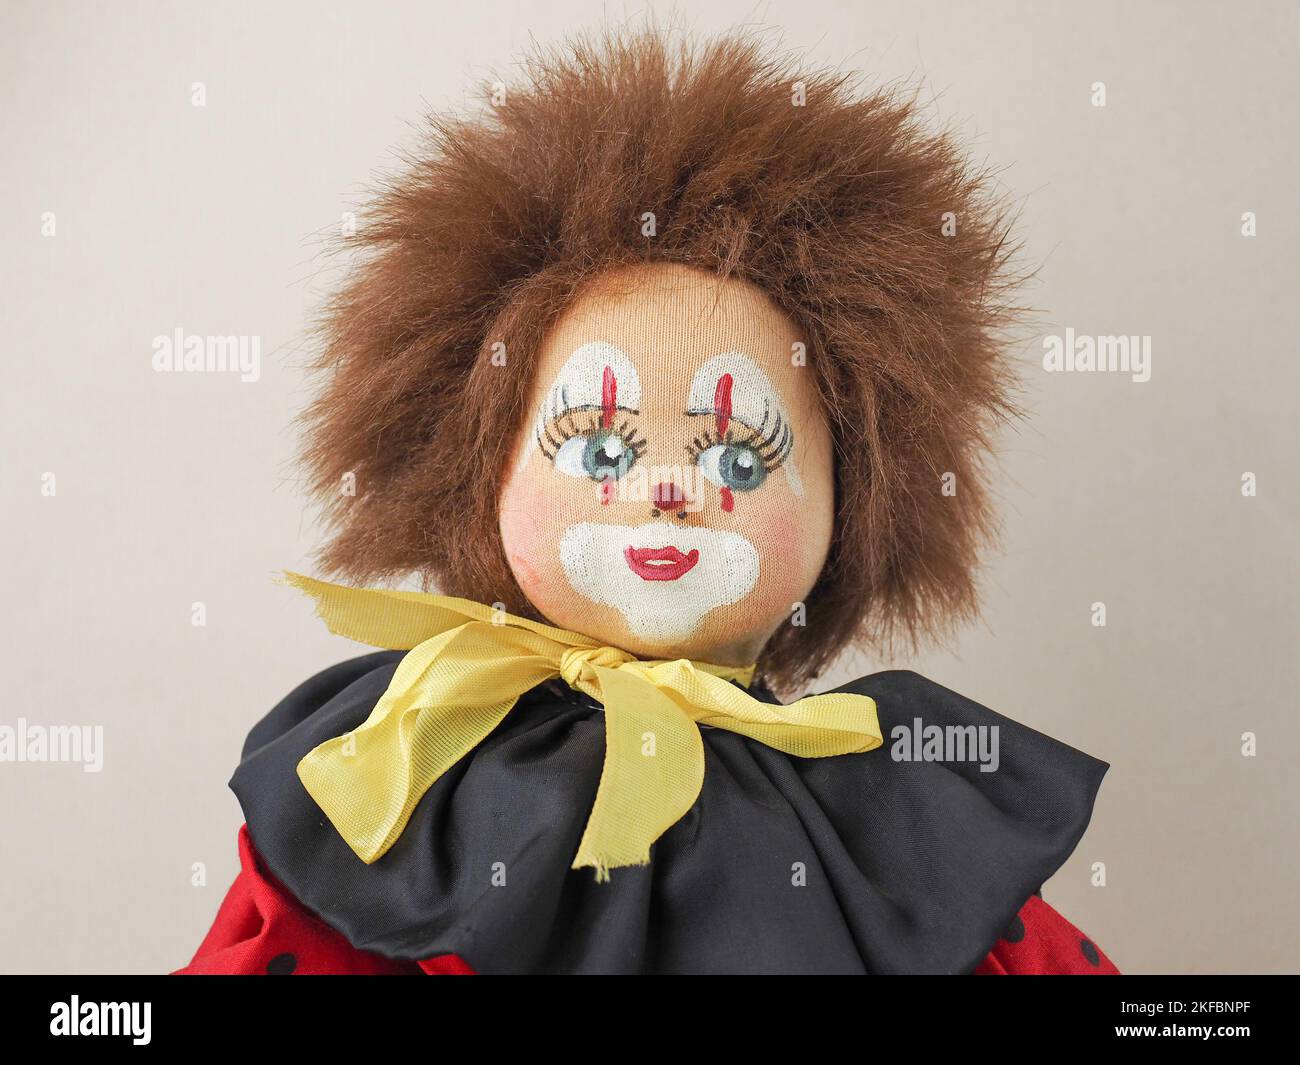 Vintage red-haired clown doll in a red suit with a black collar. Stock Photo